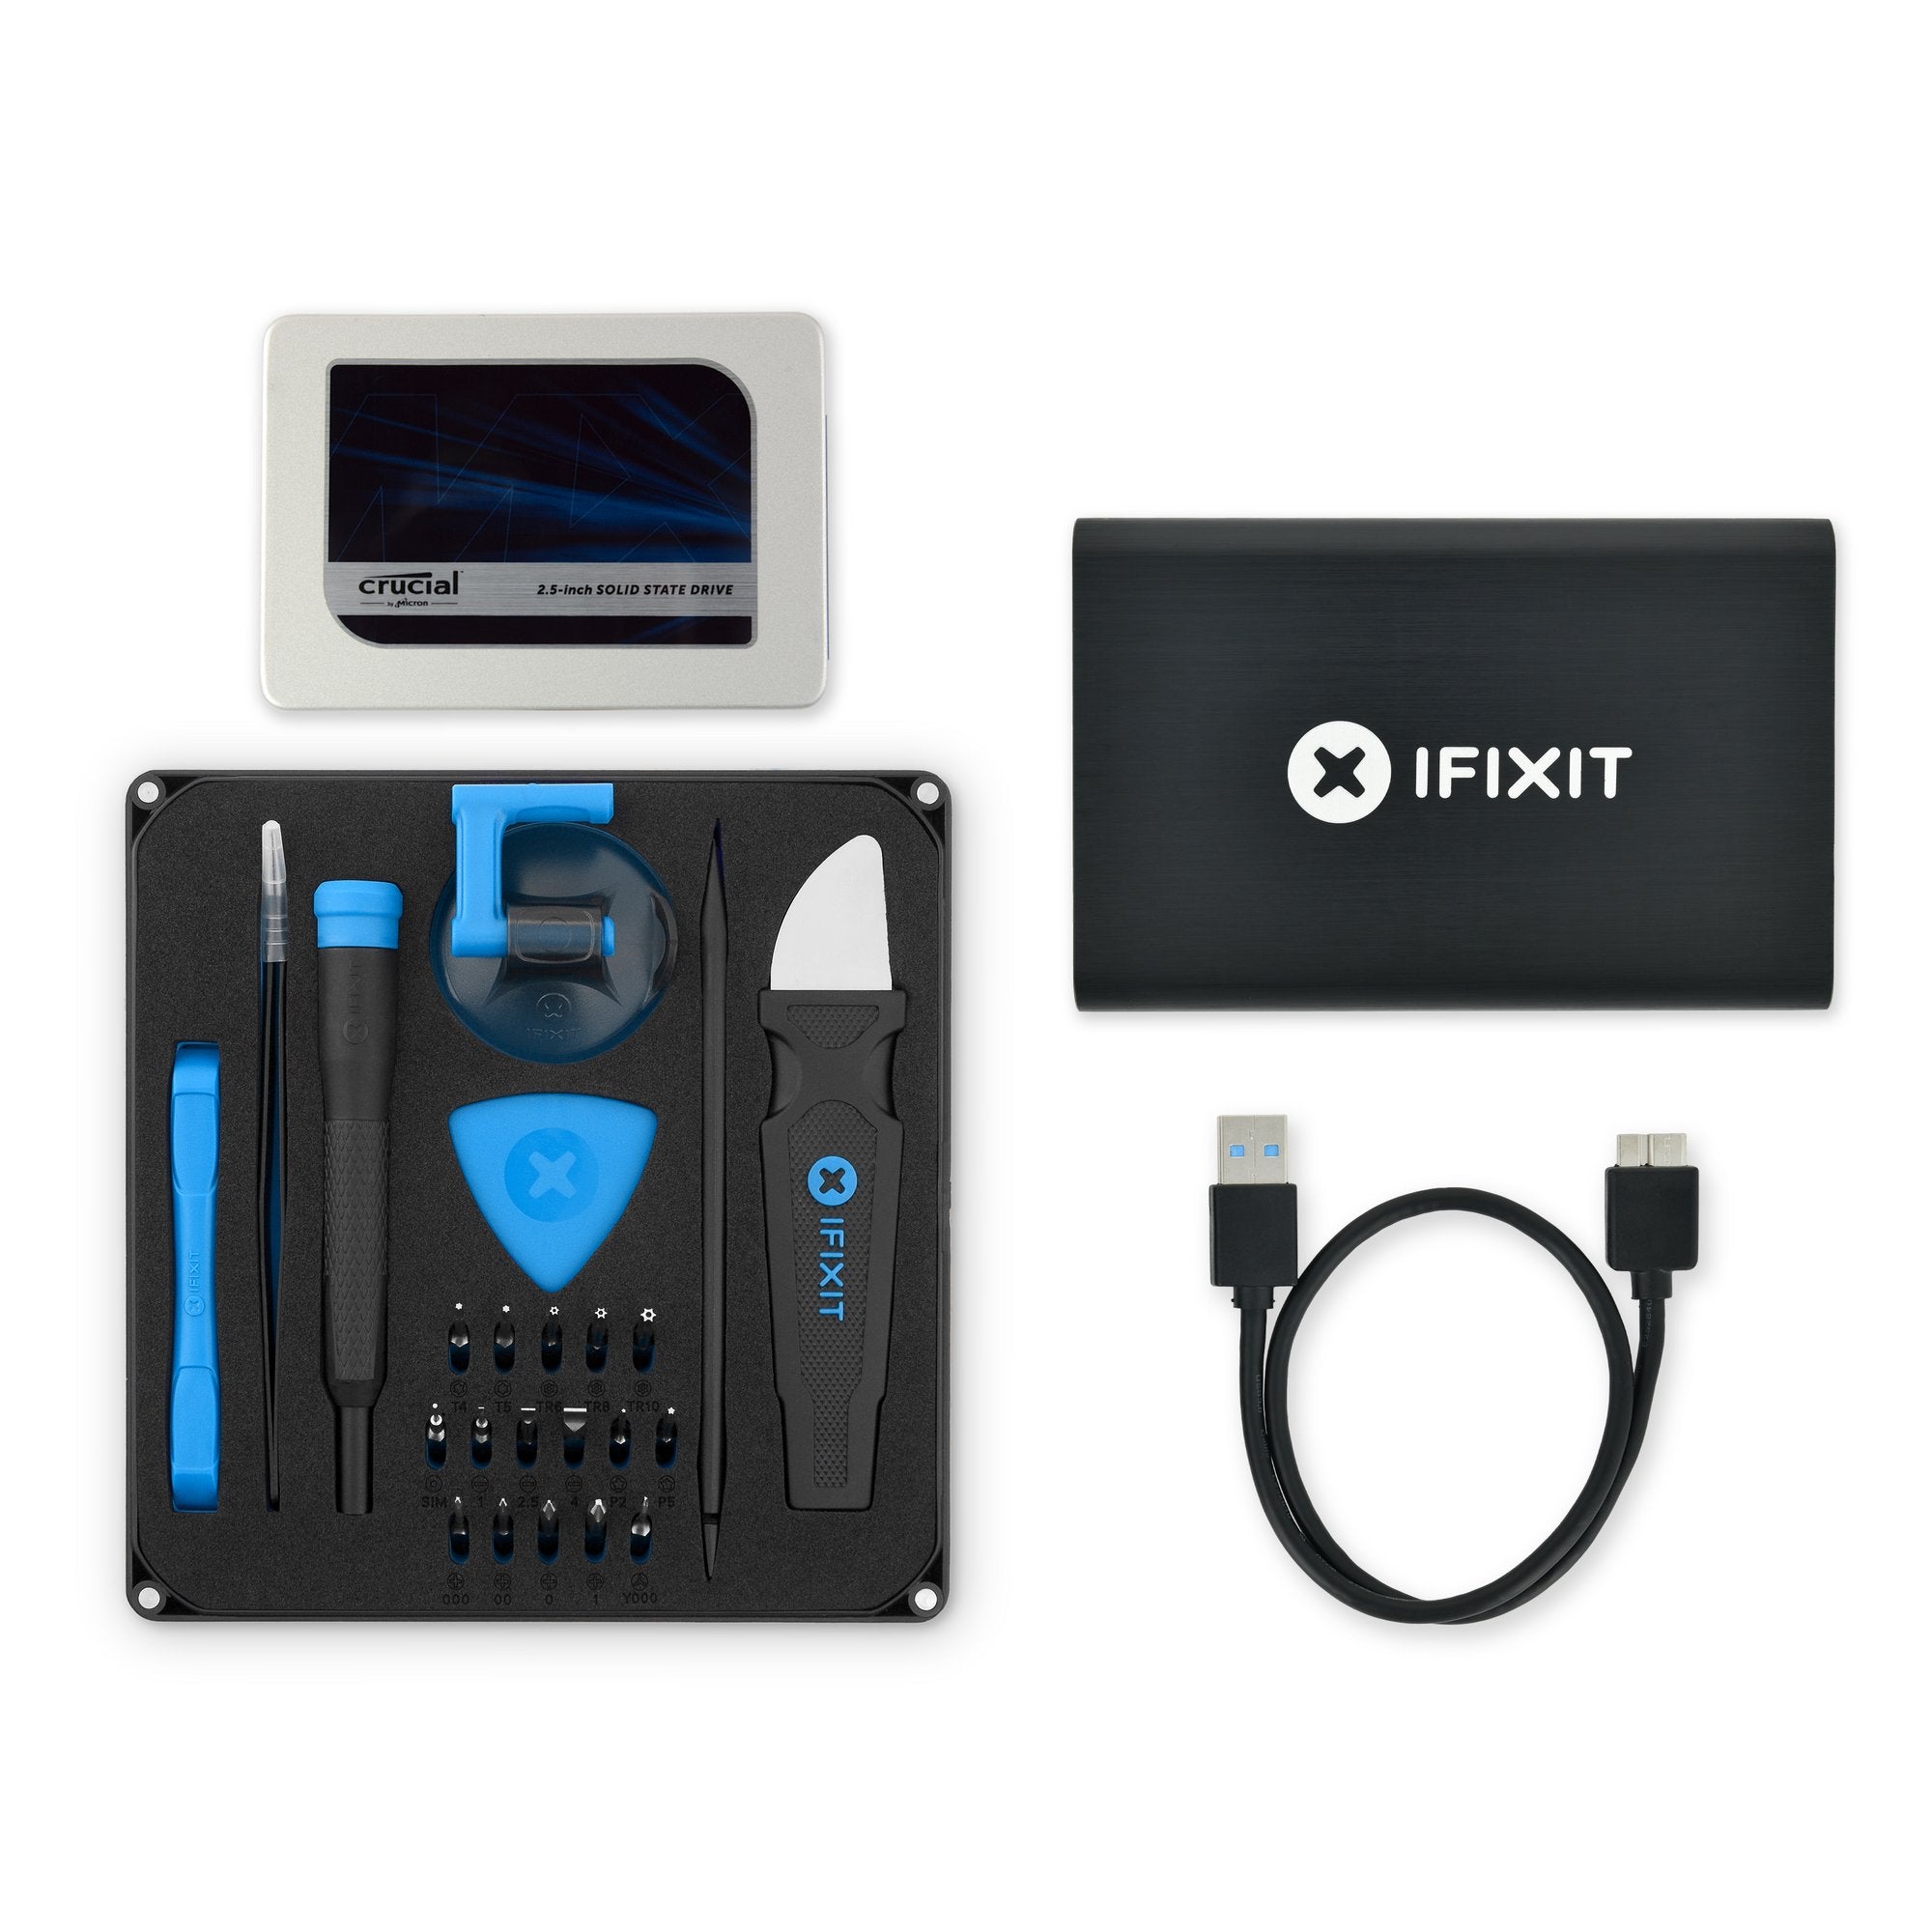 Crucial MX500 1 TB SSD—Your complete iFixit Fix Kit: a Crucial SSD, iFixit  Tools & Instructions. Two-year Quality